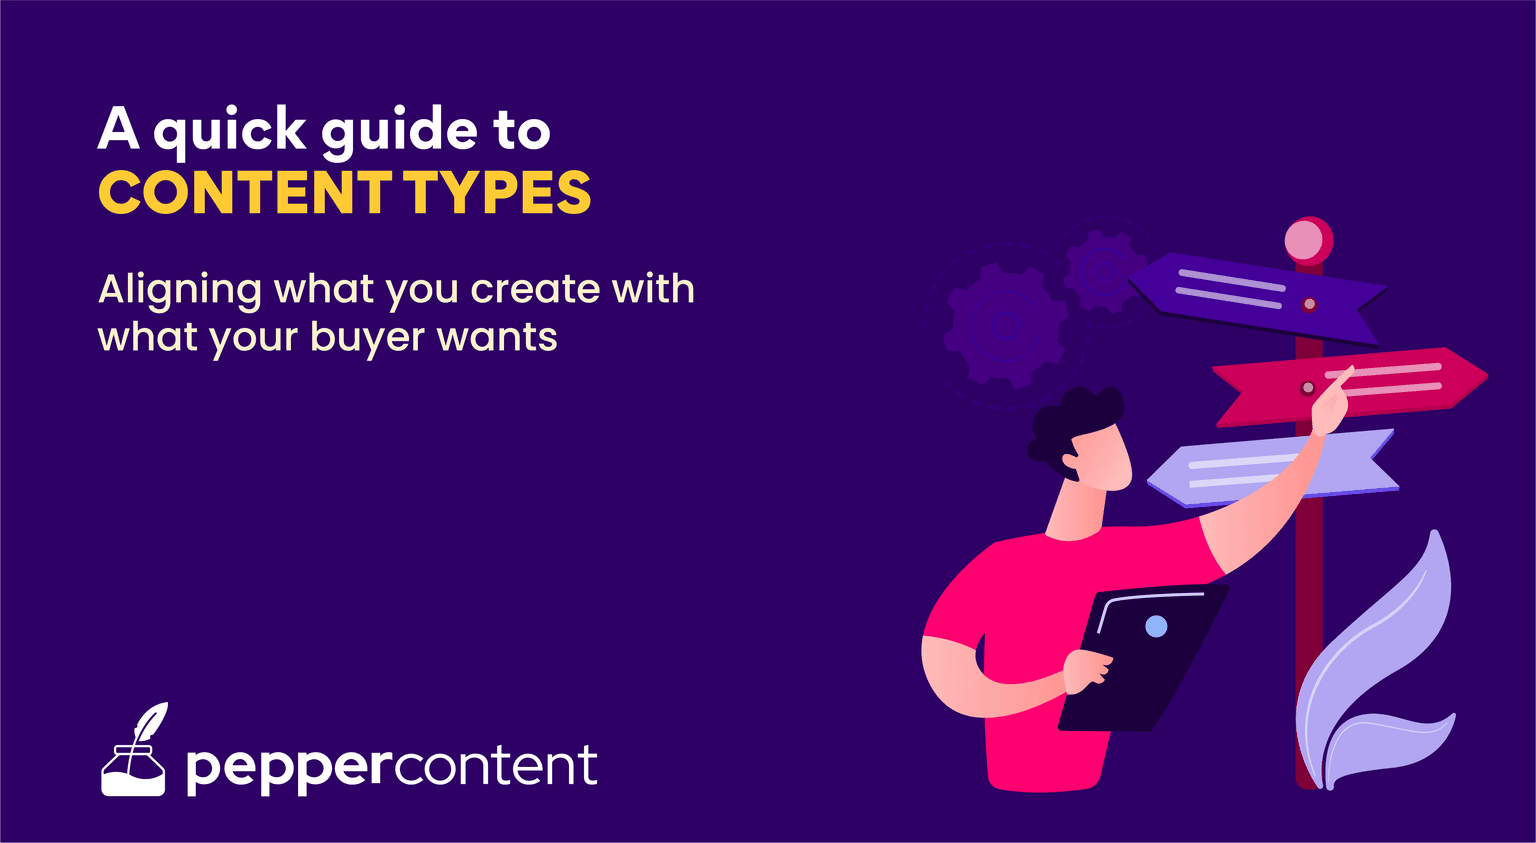 Content Types: Aligning What You Create with What Your Buyer Wants